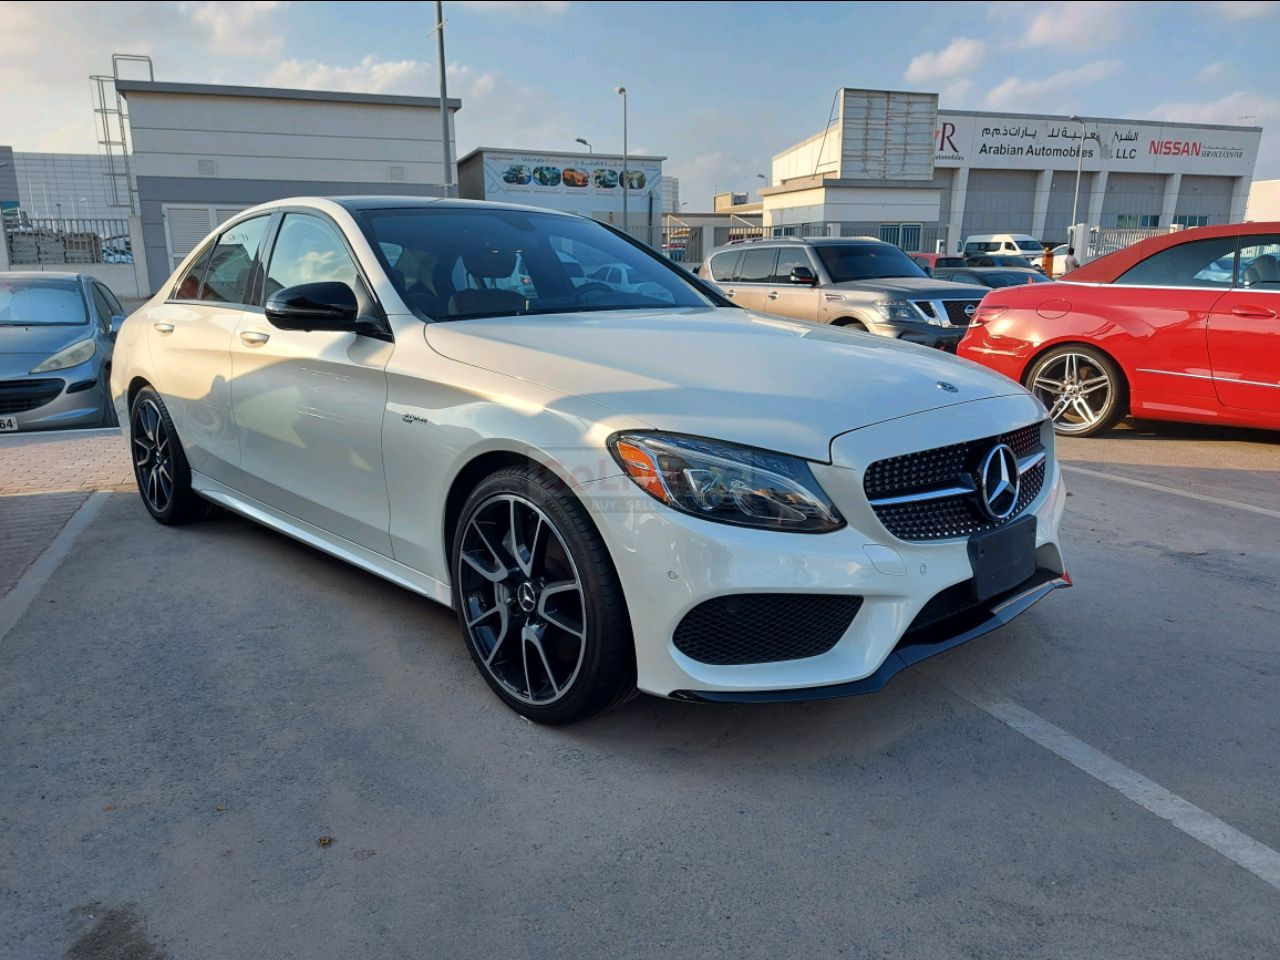 Mercedes Benz C-Class 2018 AED 138,000, Full Option, Turbo, Sunroof, Navigation System, Fog Lights, Negotiable